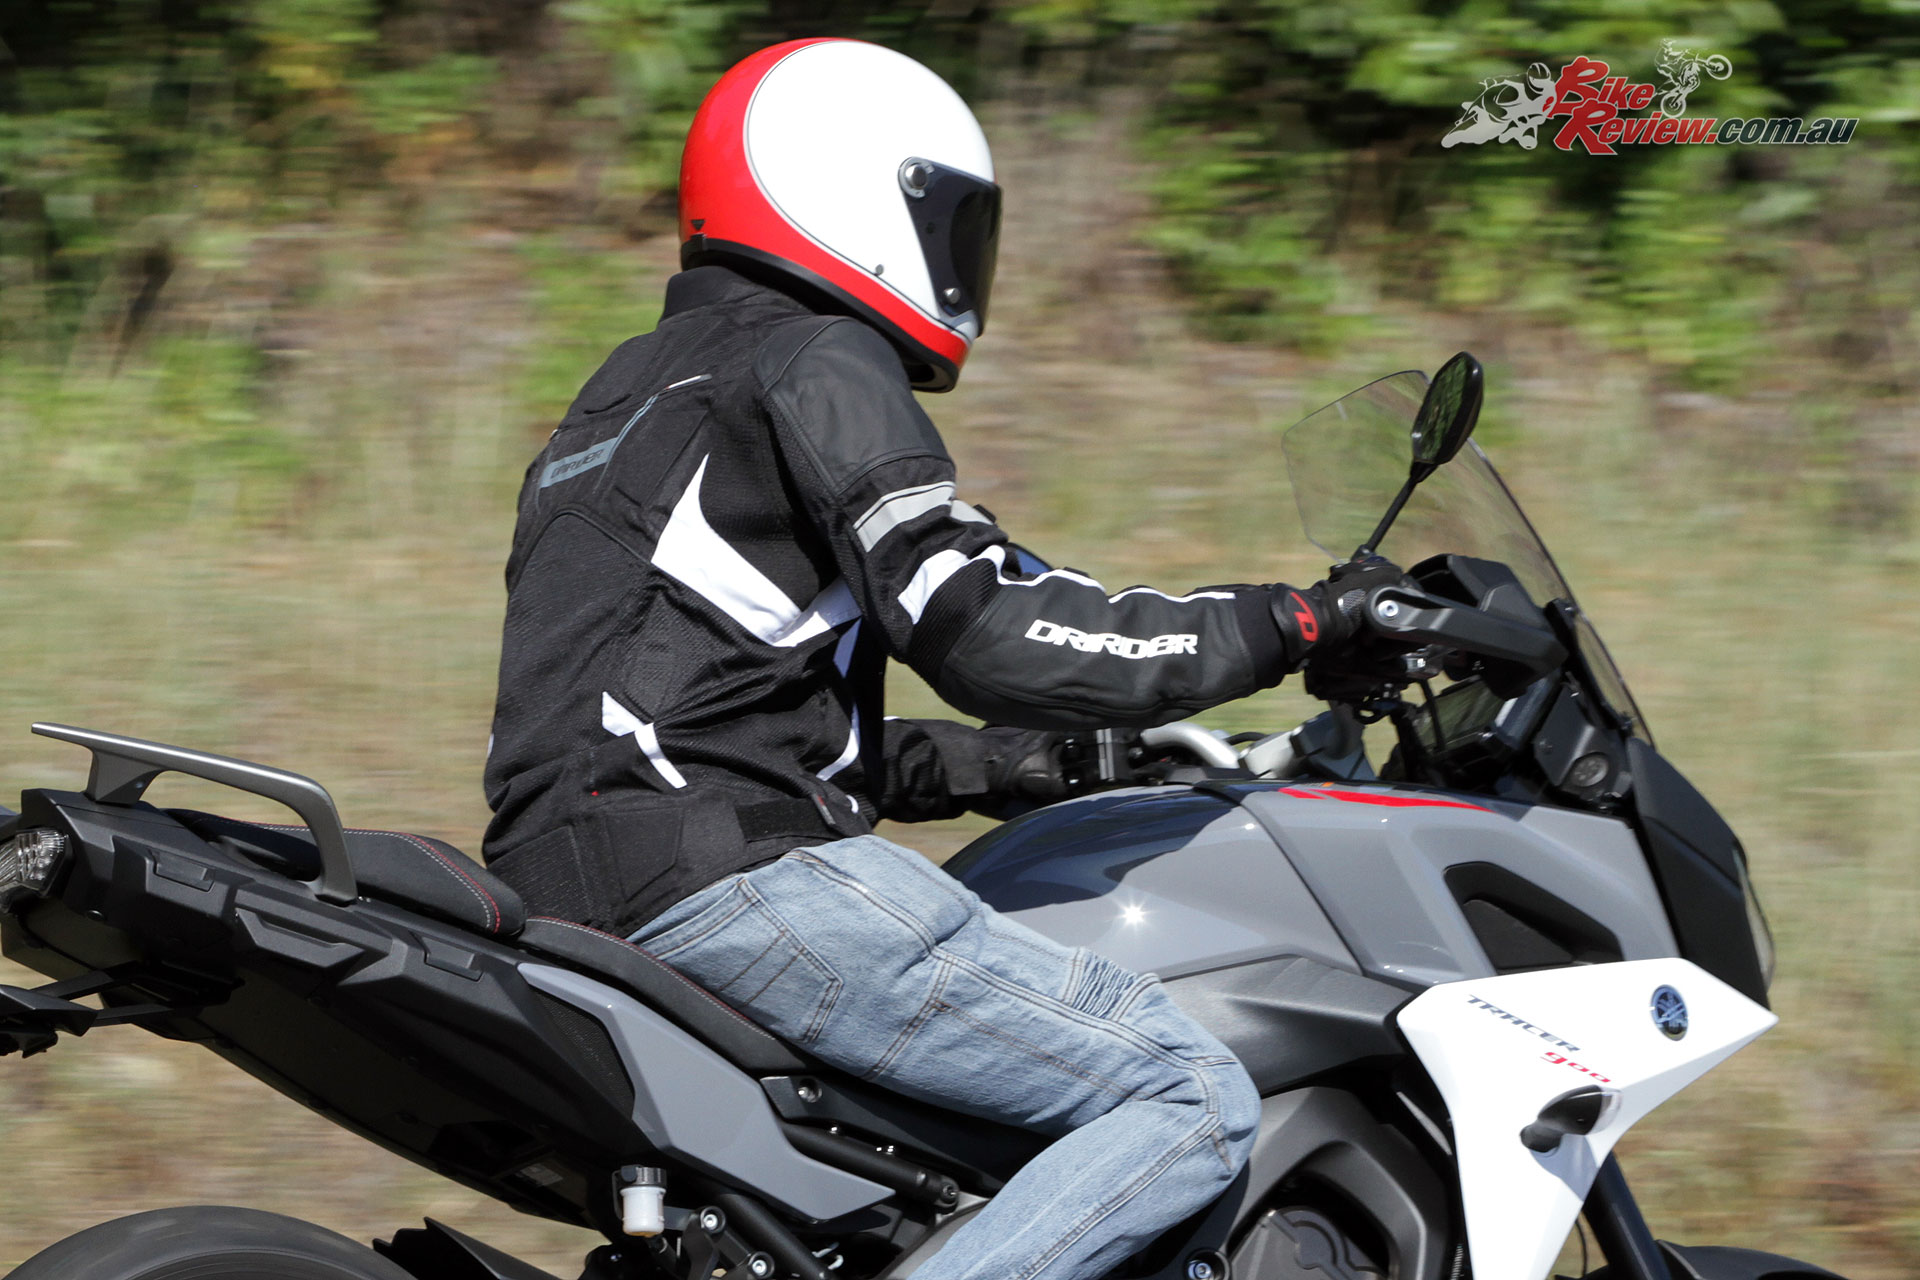 dririder climate control 2 jacket review